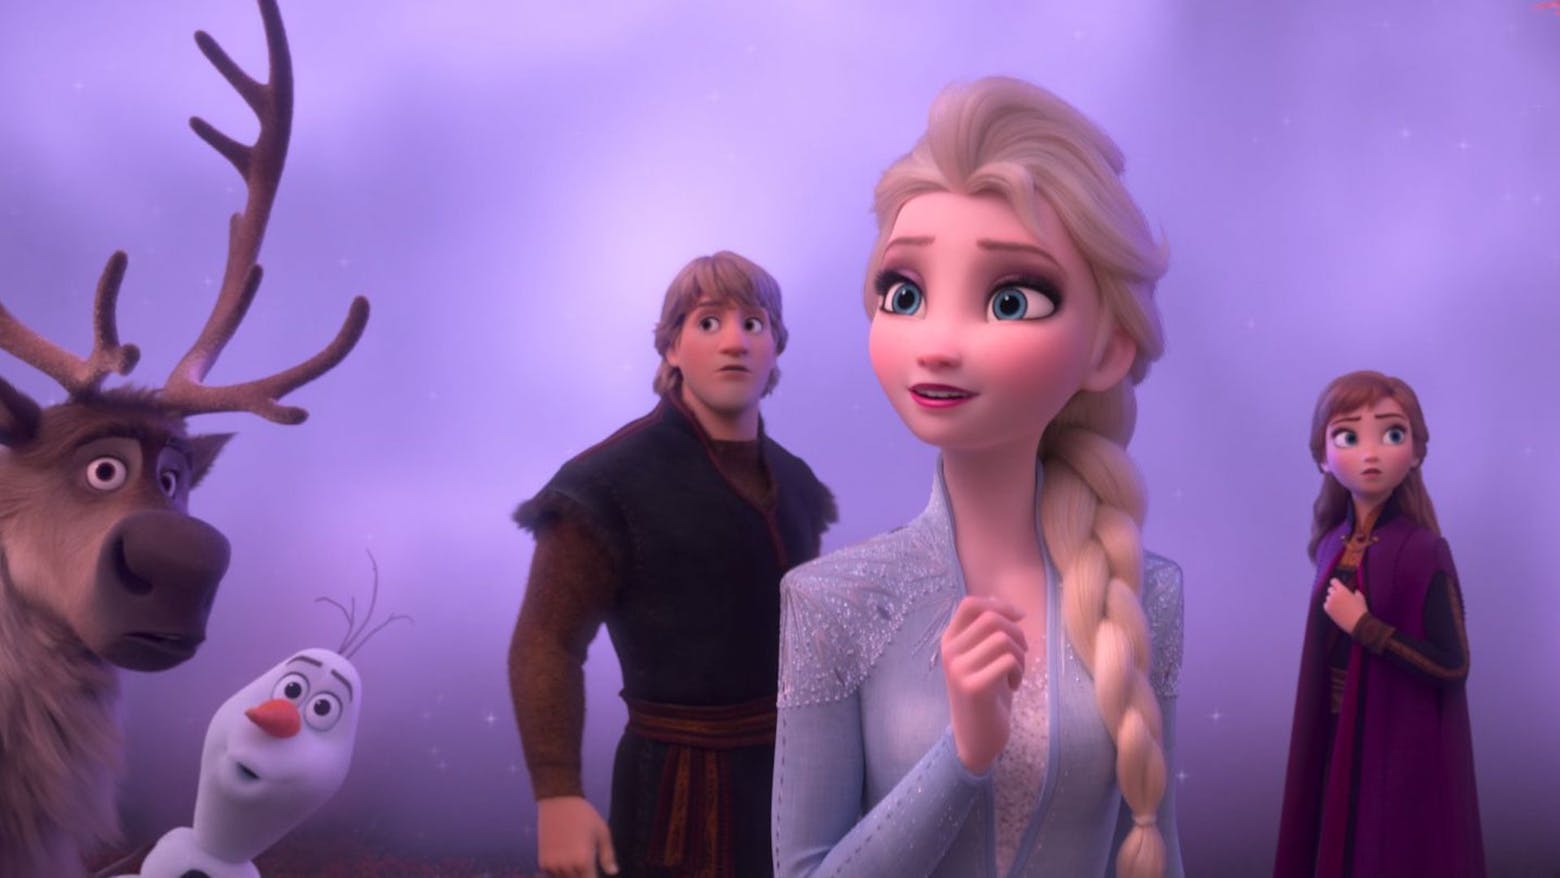 Sven, Olaf, Kristoff, Elsa and Anna in Frozen 2